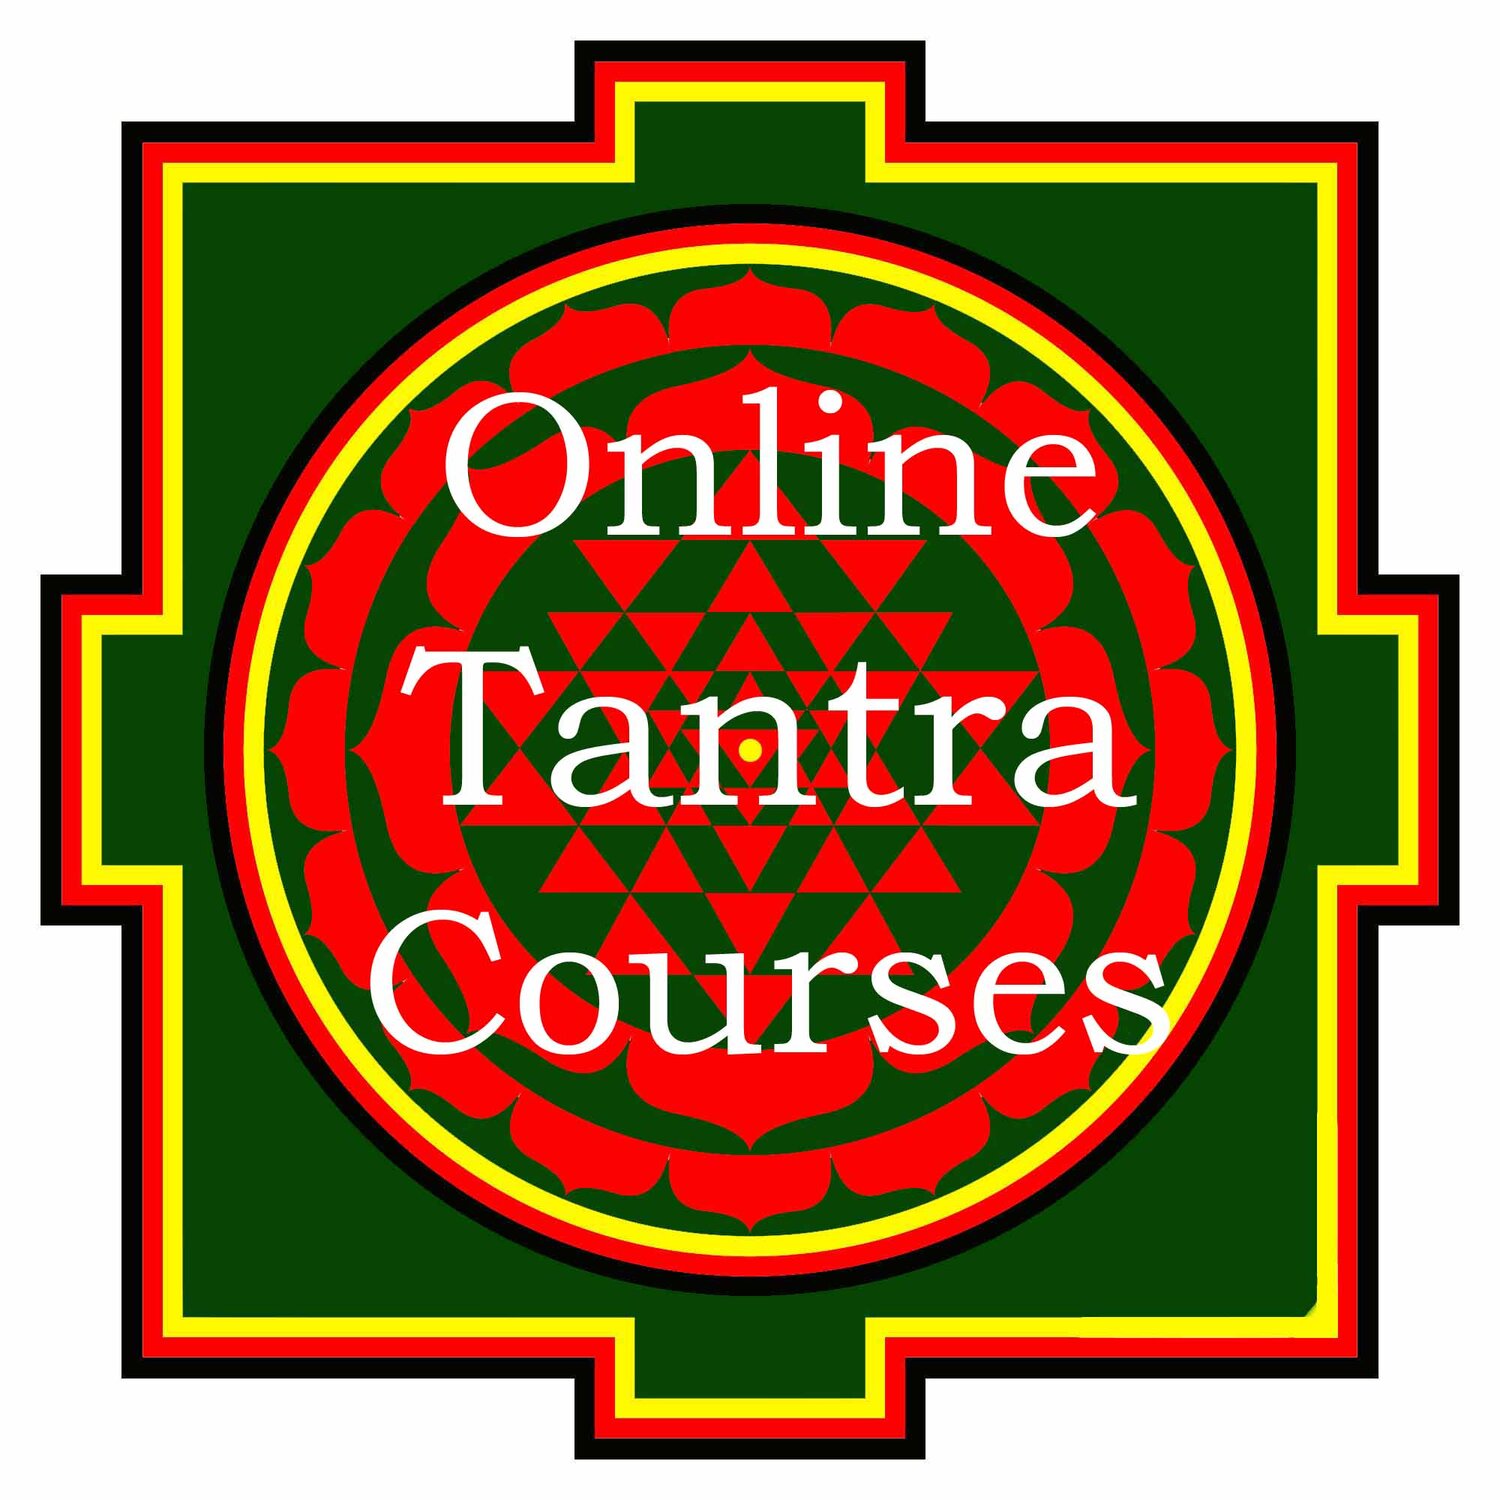 What Are The Principles Of Tantra